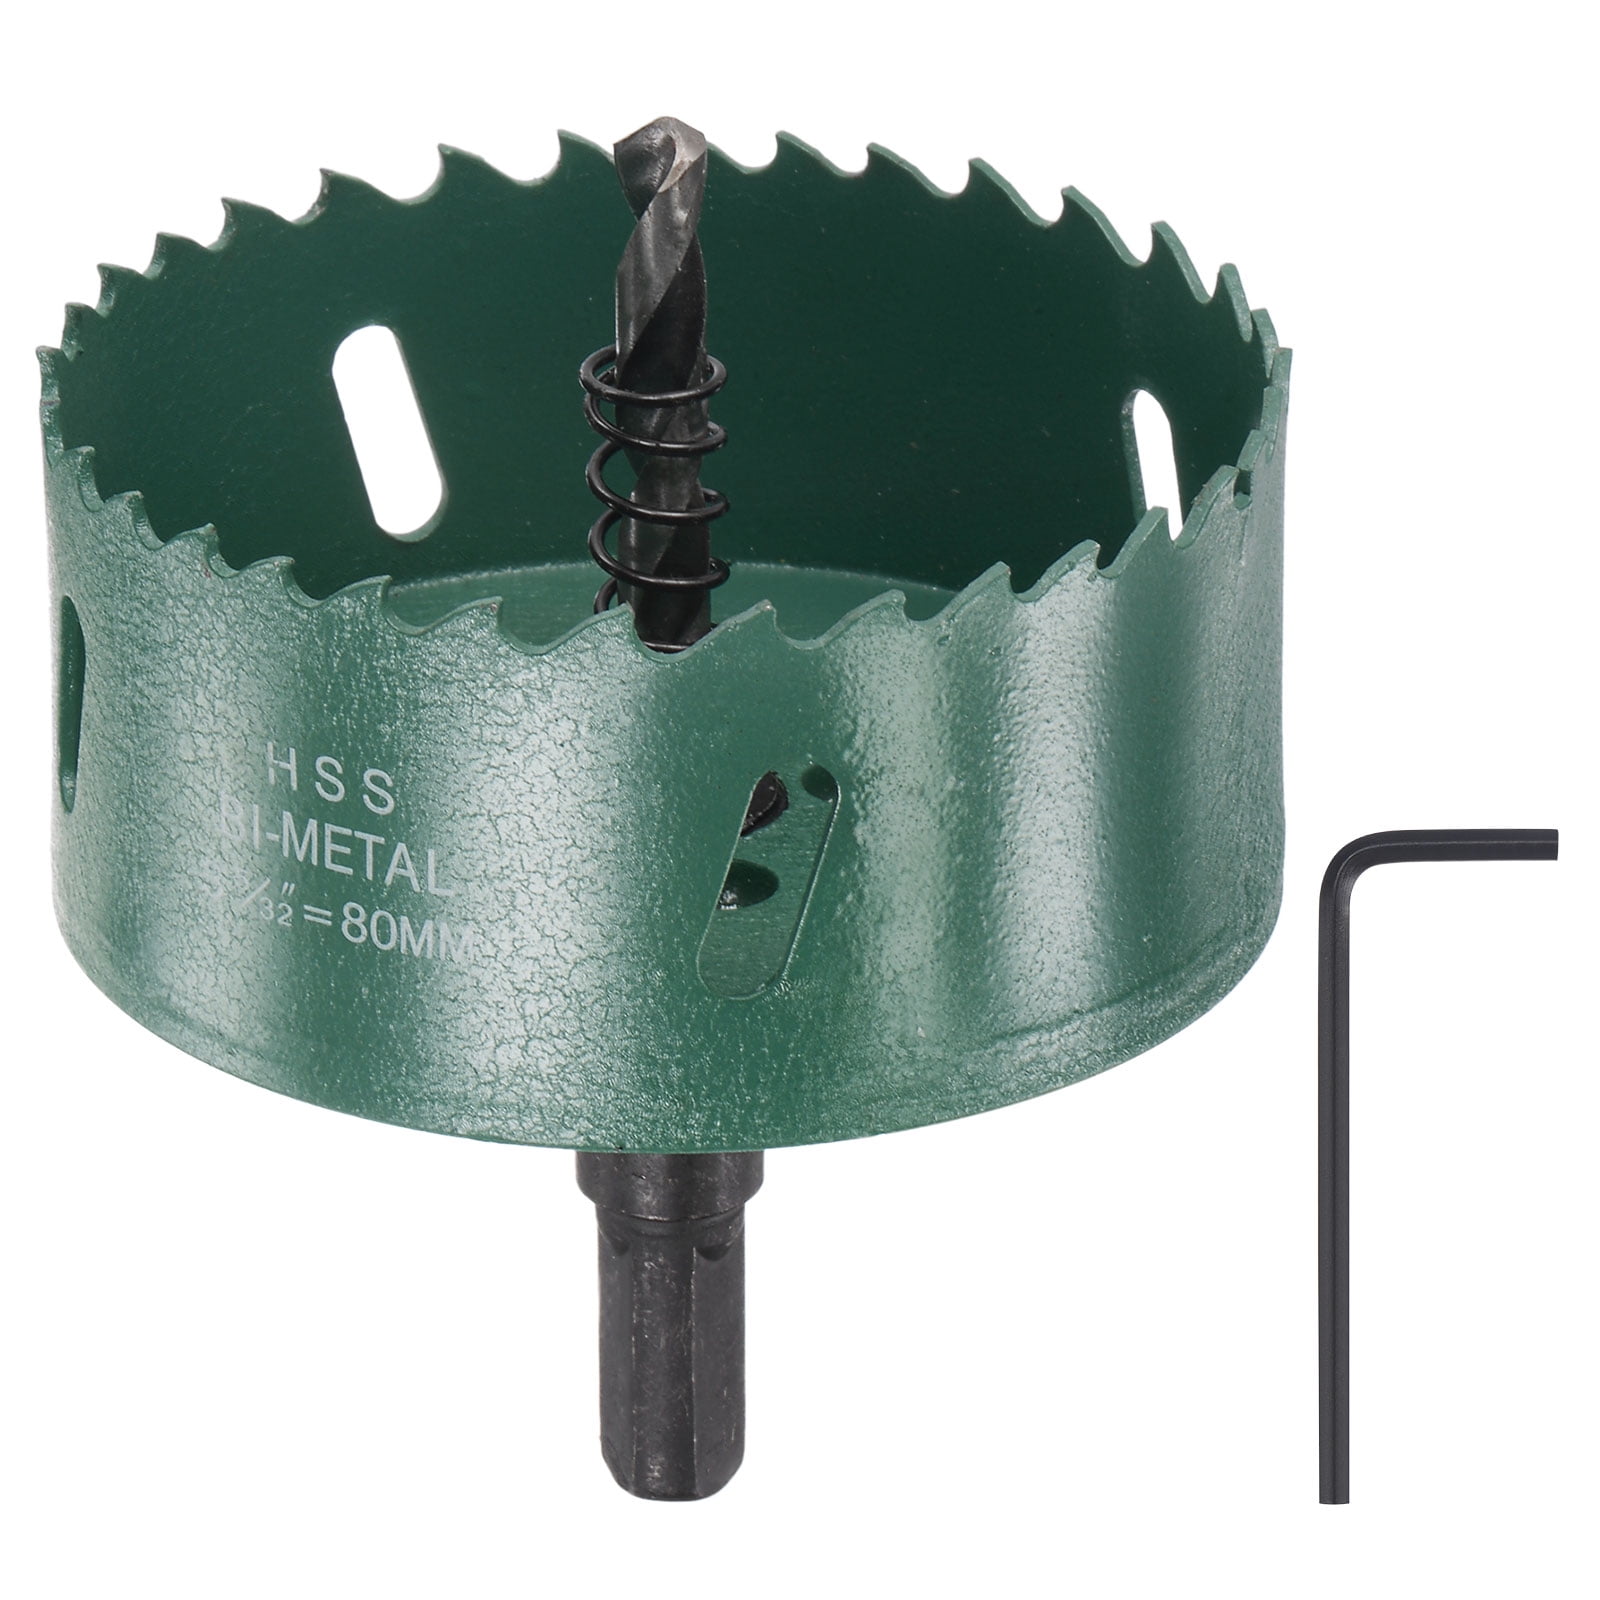 Hc2 Hole Cutter 5/16 By Kemper Tools